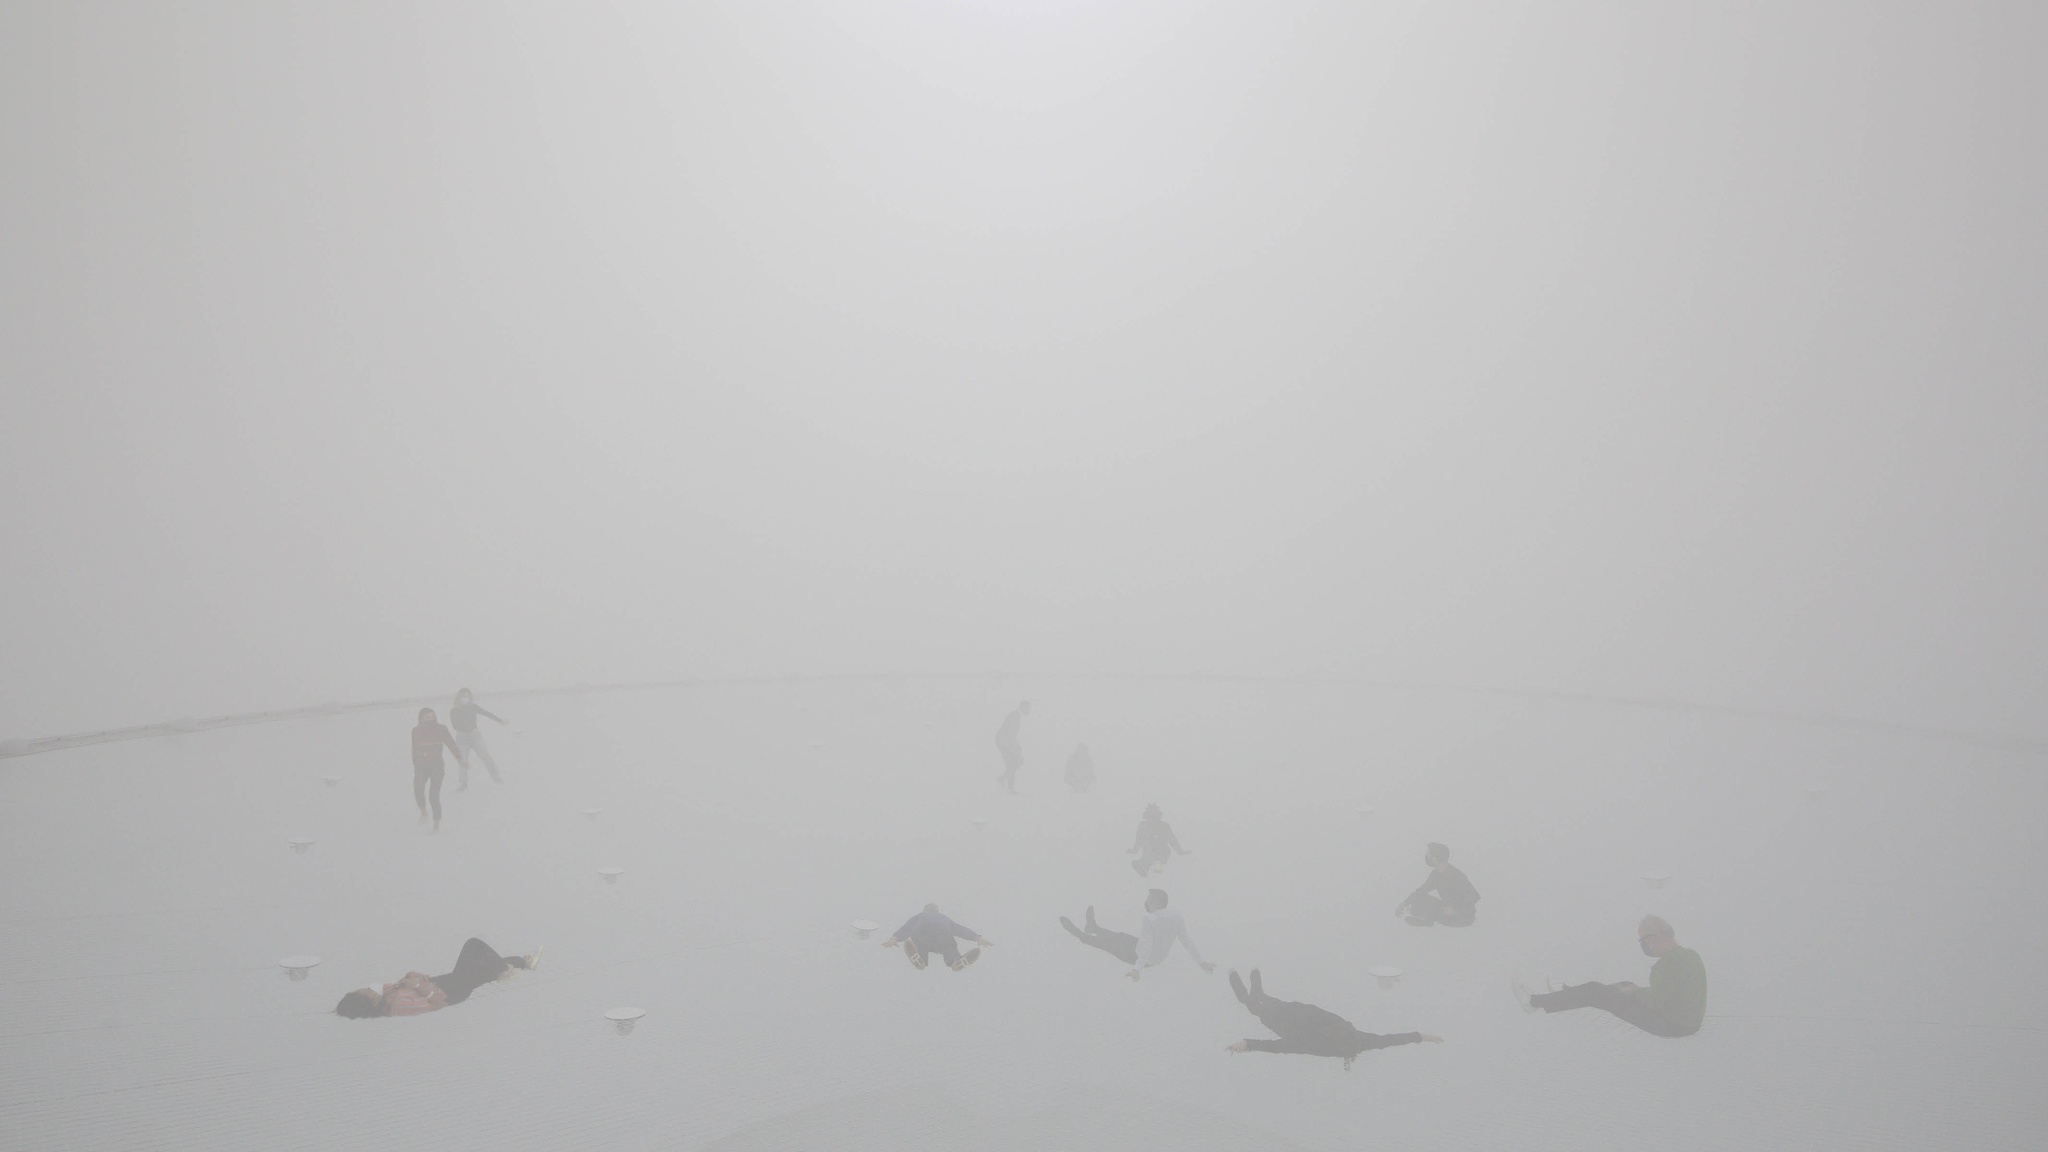 People recline on a vast net in a foggy, white environment where the edges of space dissolve in the atmosphere